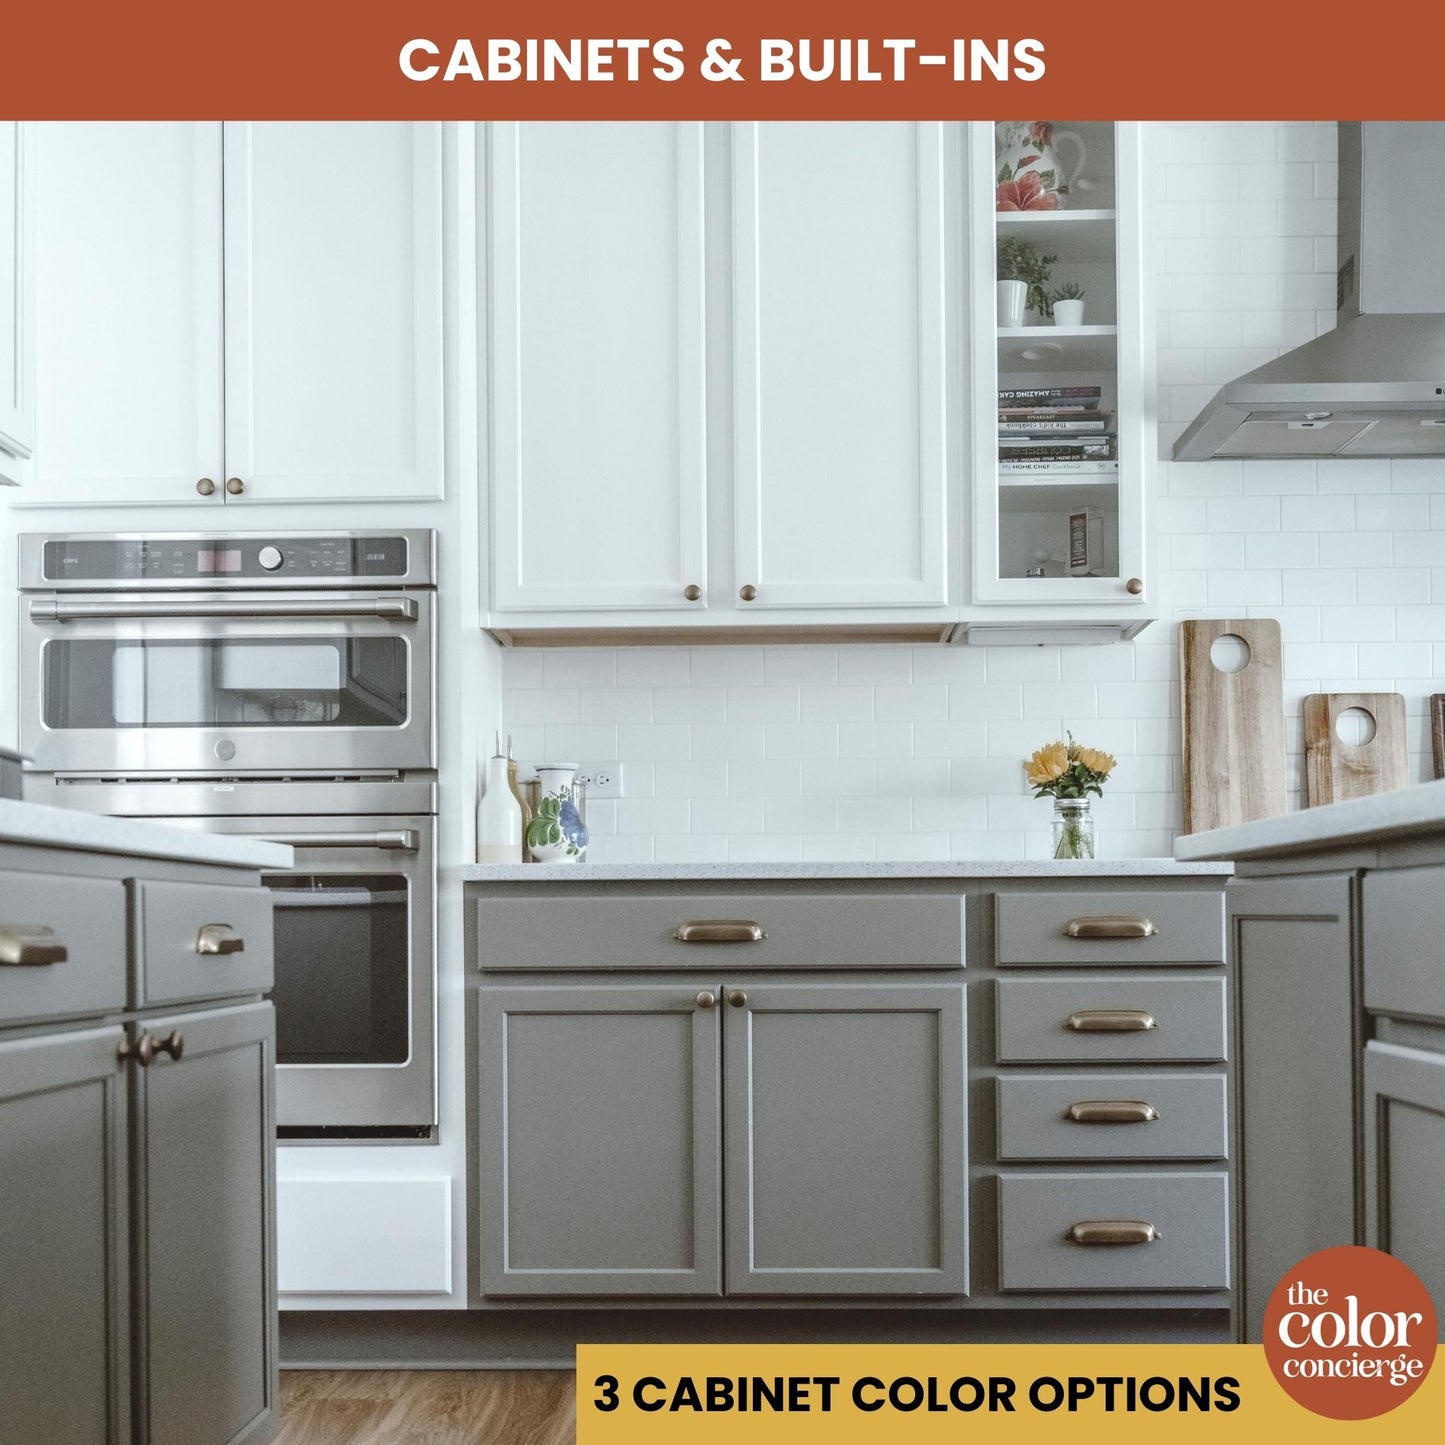 Cabinets or Built-ins